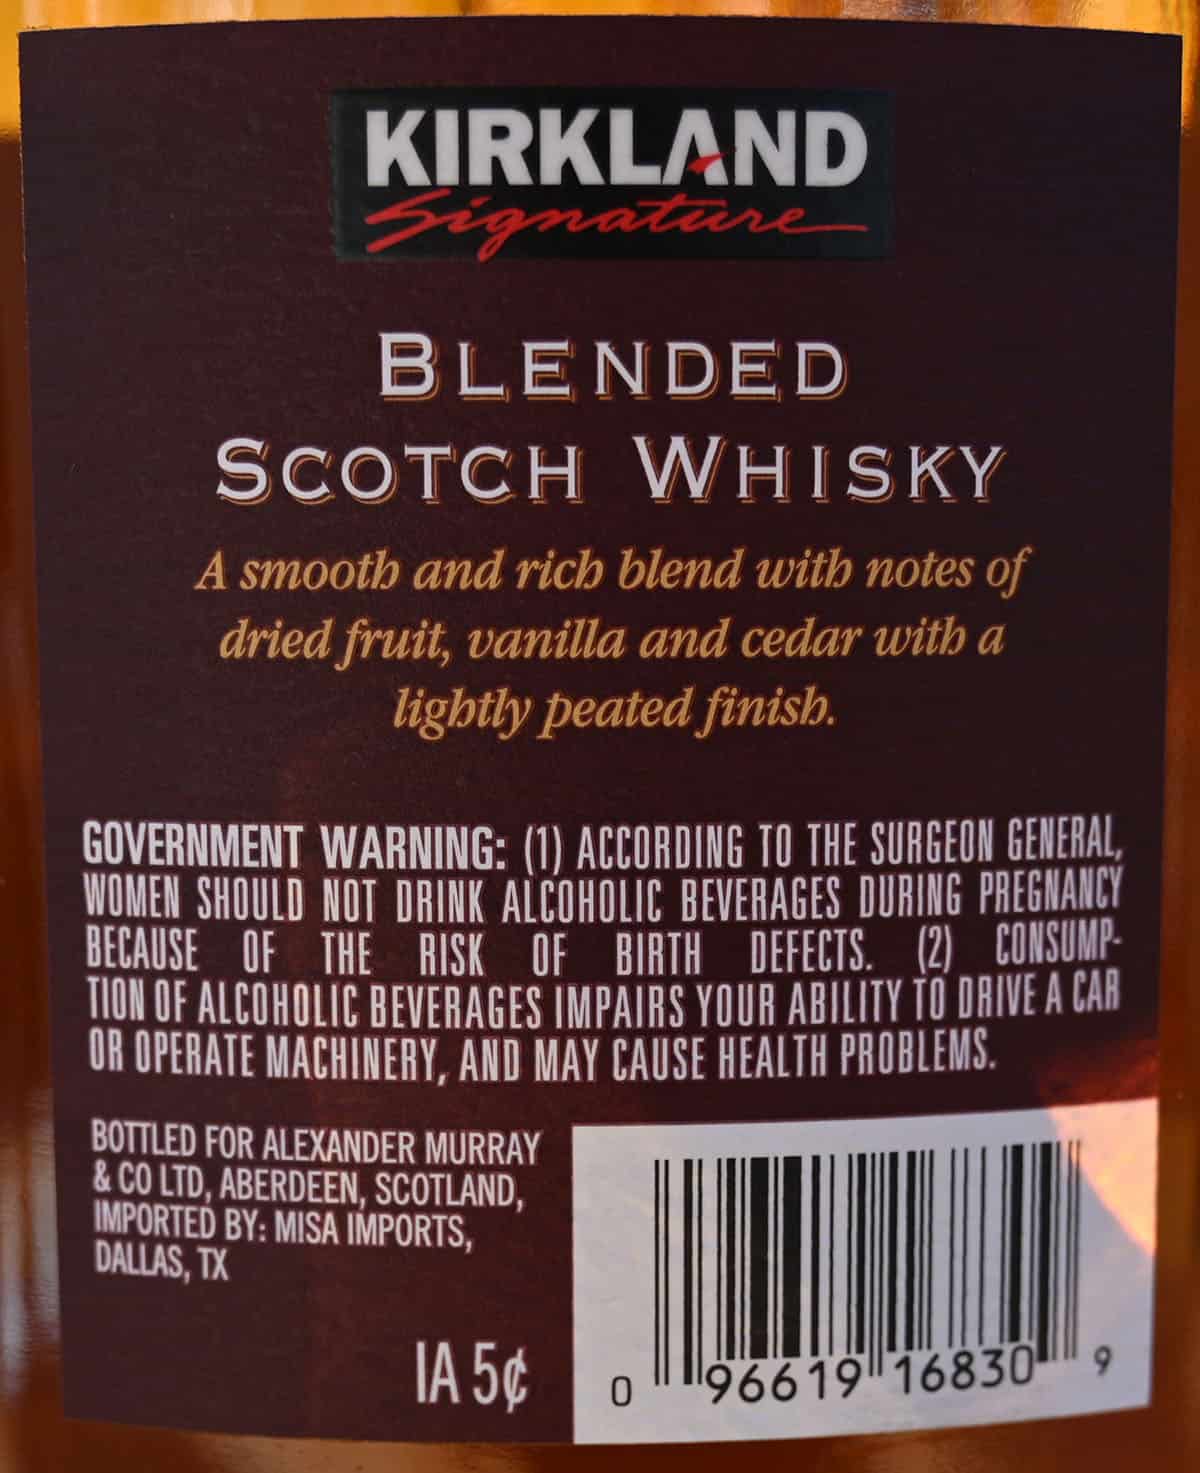 Image of the back label of the Kirkland Signature Blended Scotch Whisky.